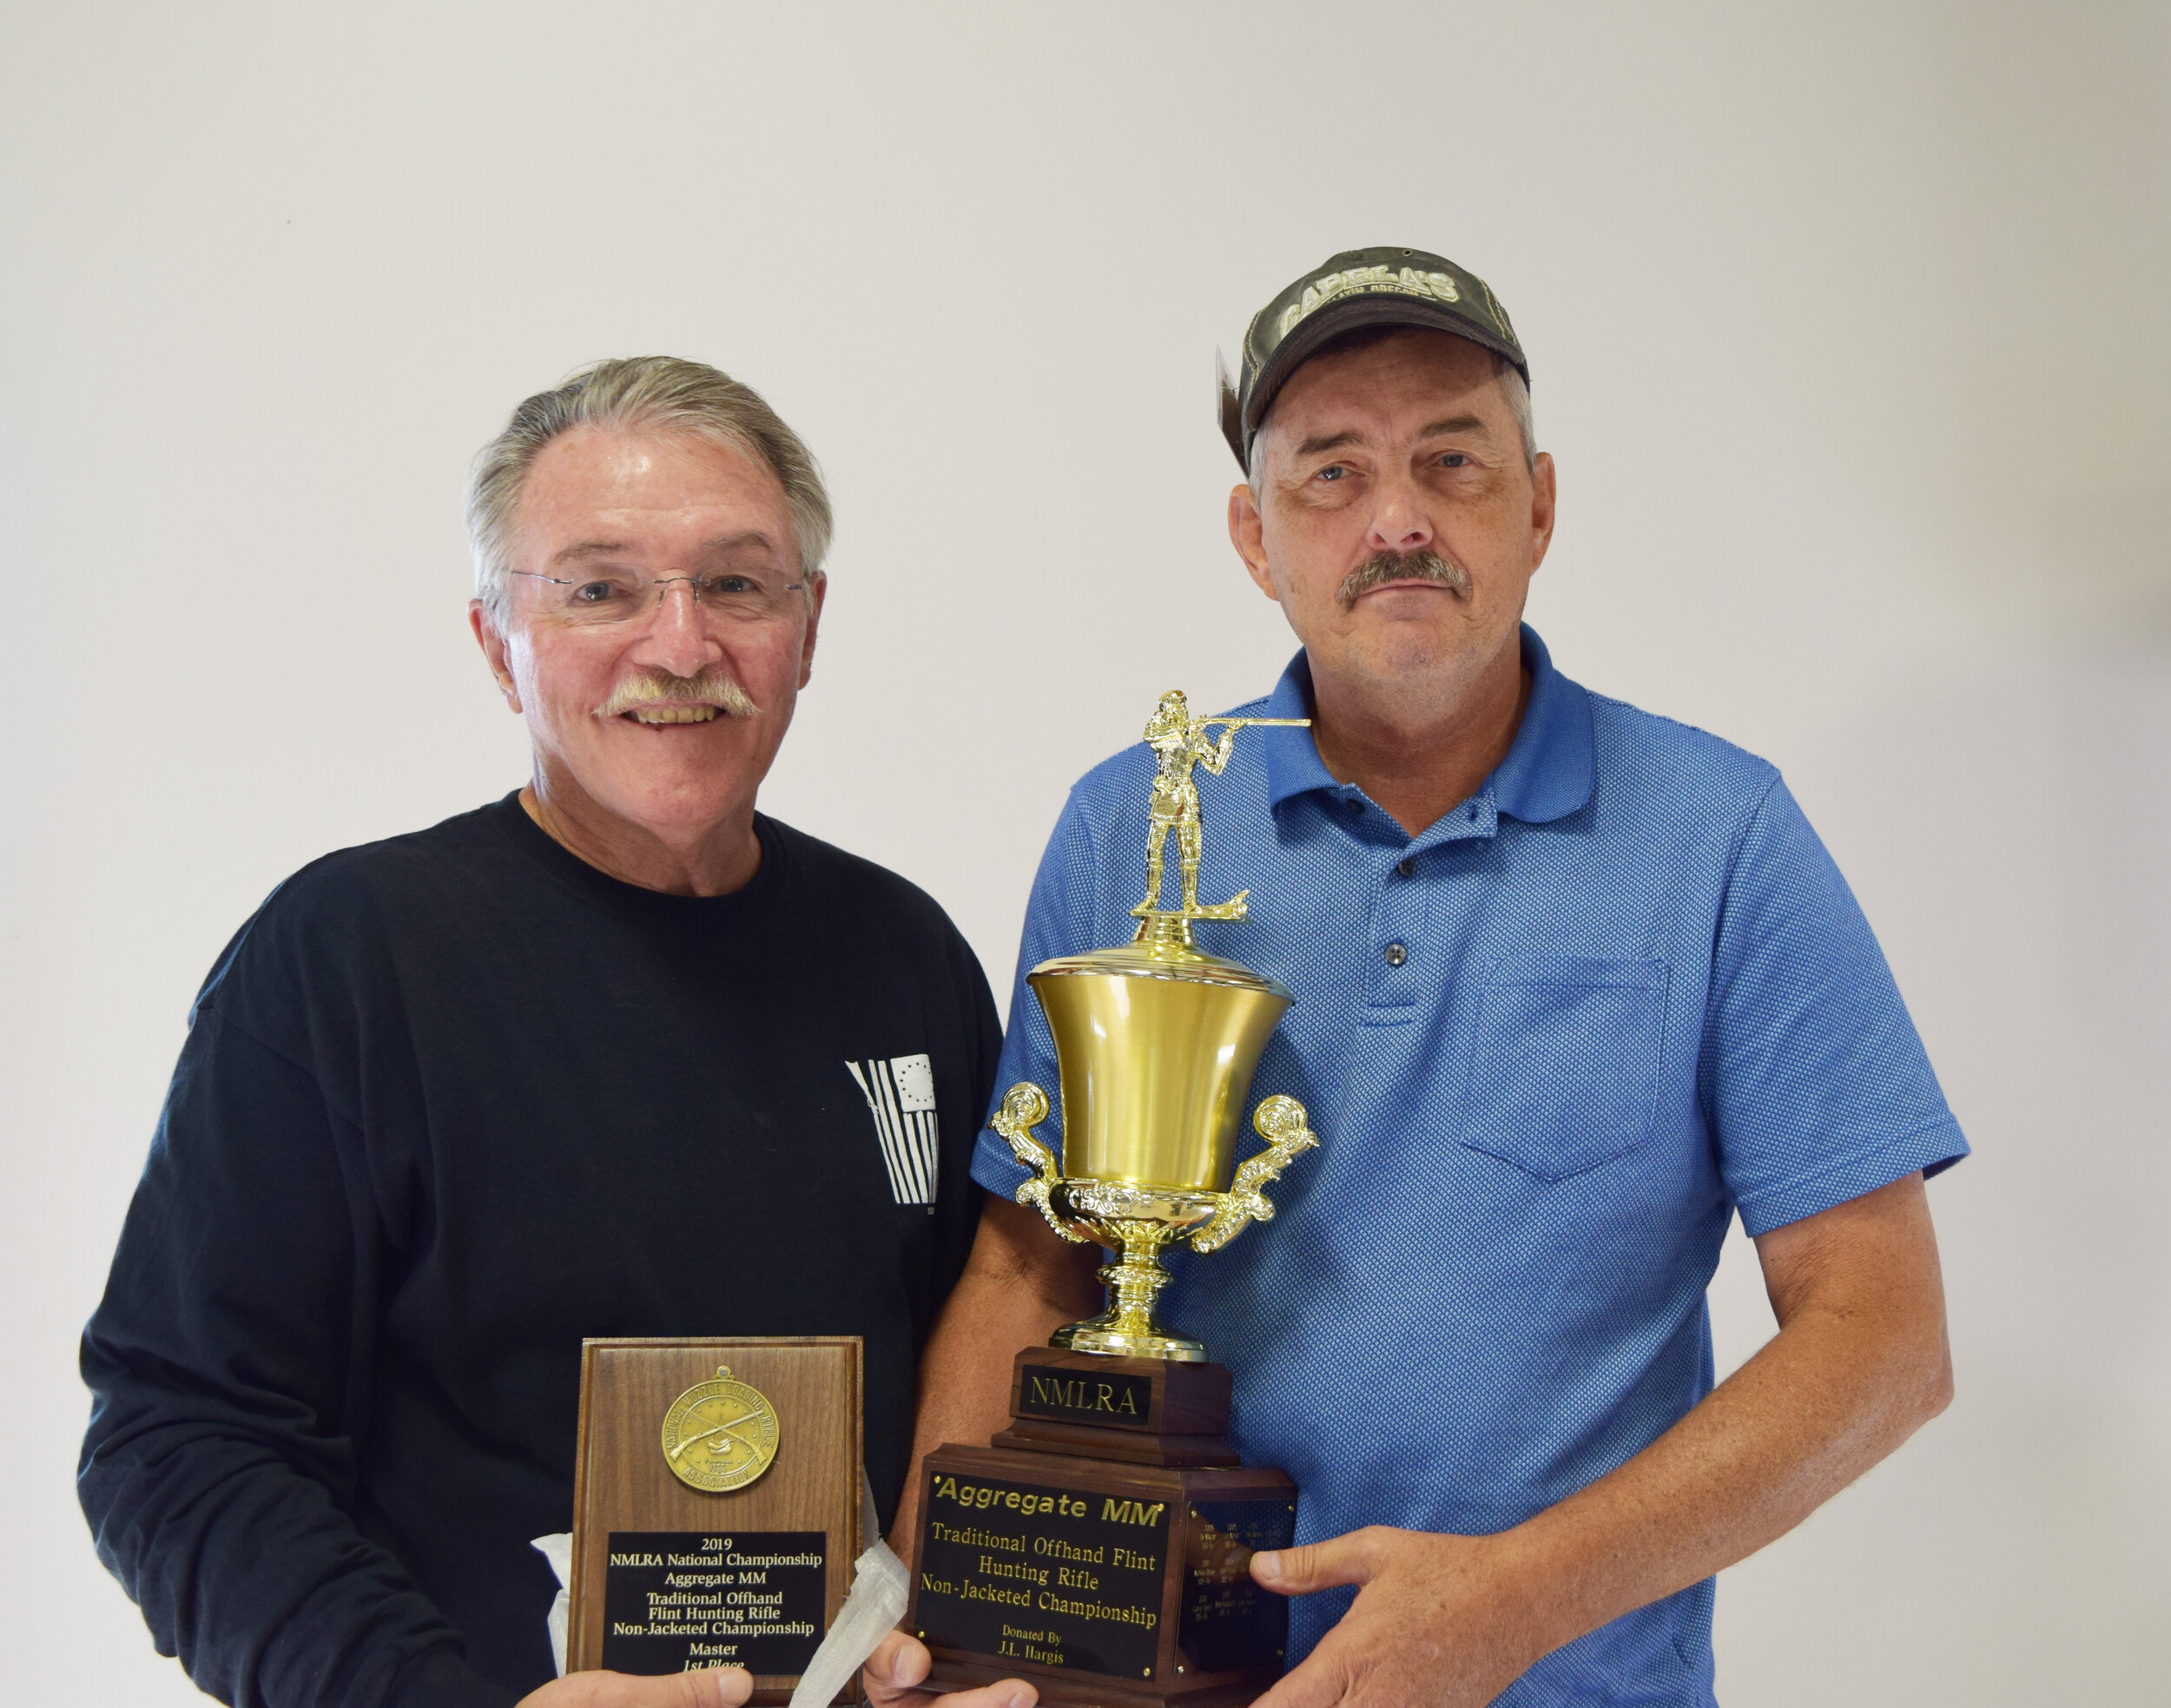  Keith Ethington - Aggregate MM - Traditional Offhand Flint Hunting Rifle Non-Jacketed Championship Winner with NMLRA President Brent Steele 